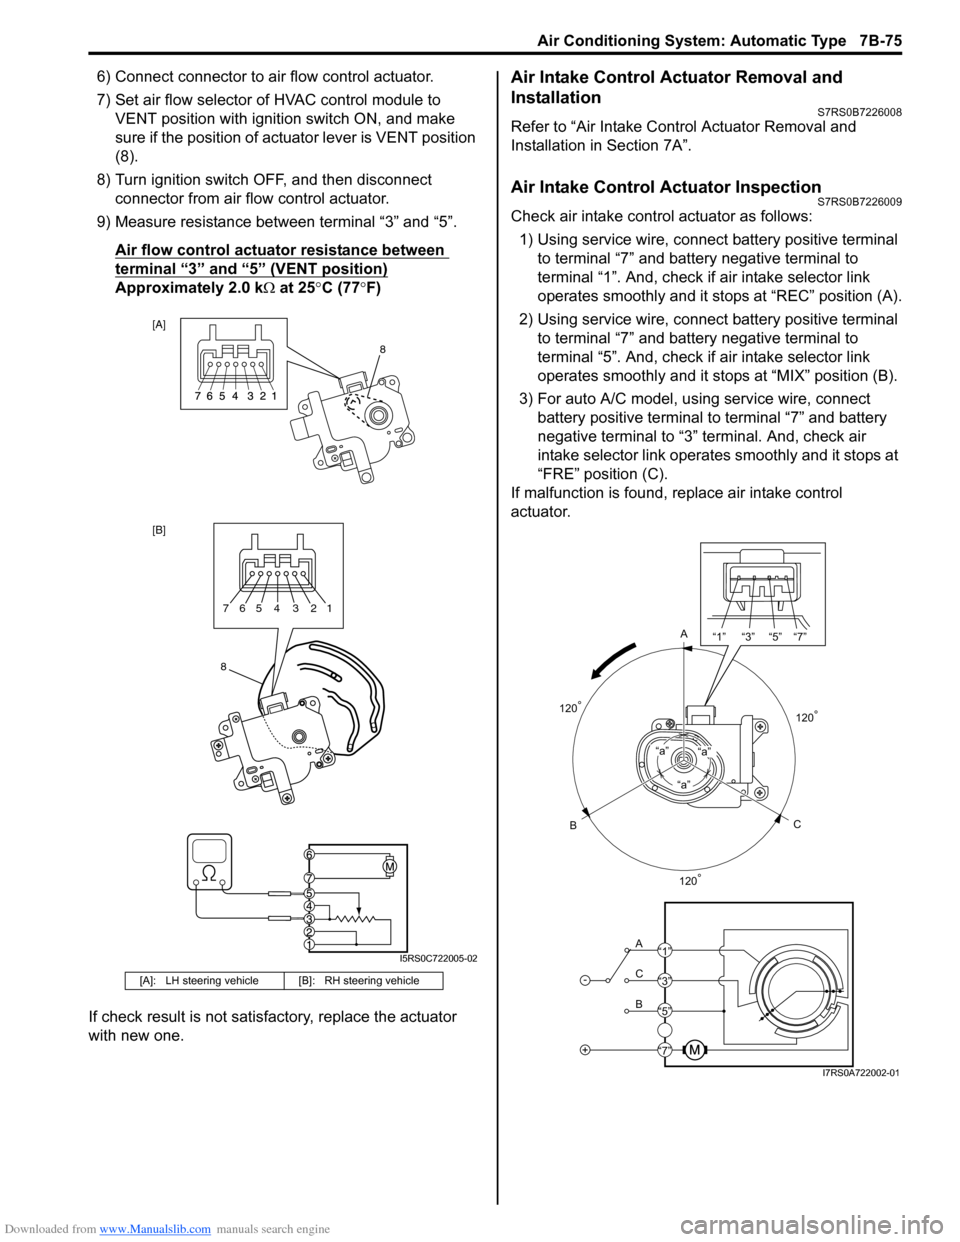 SUZUKI SWIFT 2008 2.G Service Workshop Manual Downloaded from www.Manualslib.com manuals search engine Air Conditioning System: Automatic Type 7B-75
6) Connect connector to air flow control actuator.
7) Set air flow selector of HVAC control modul